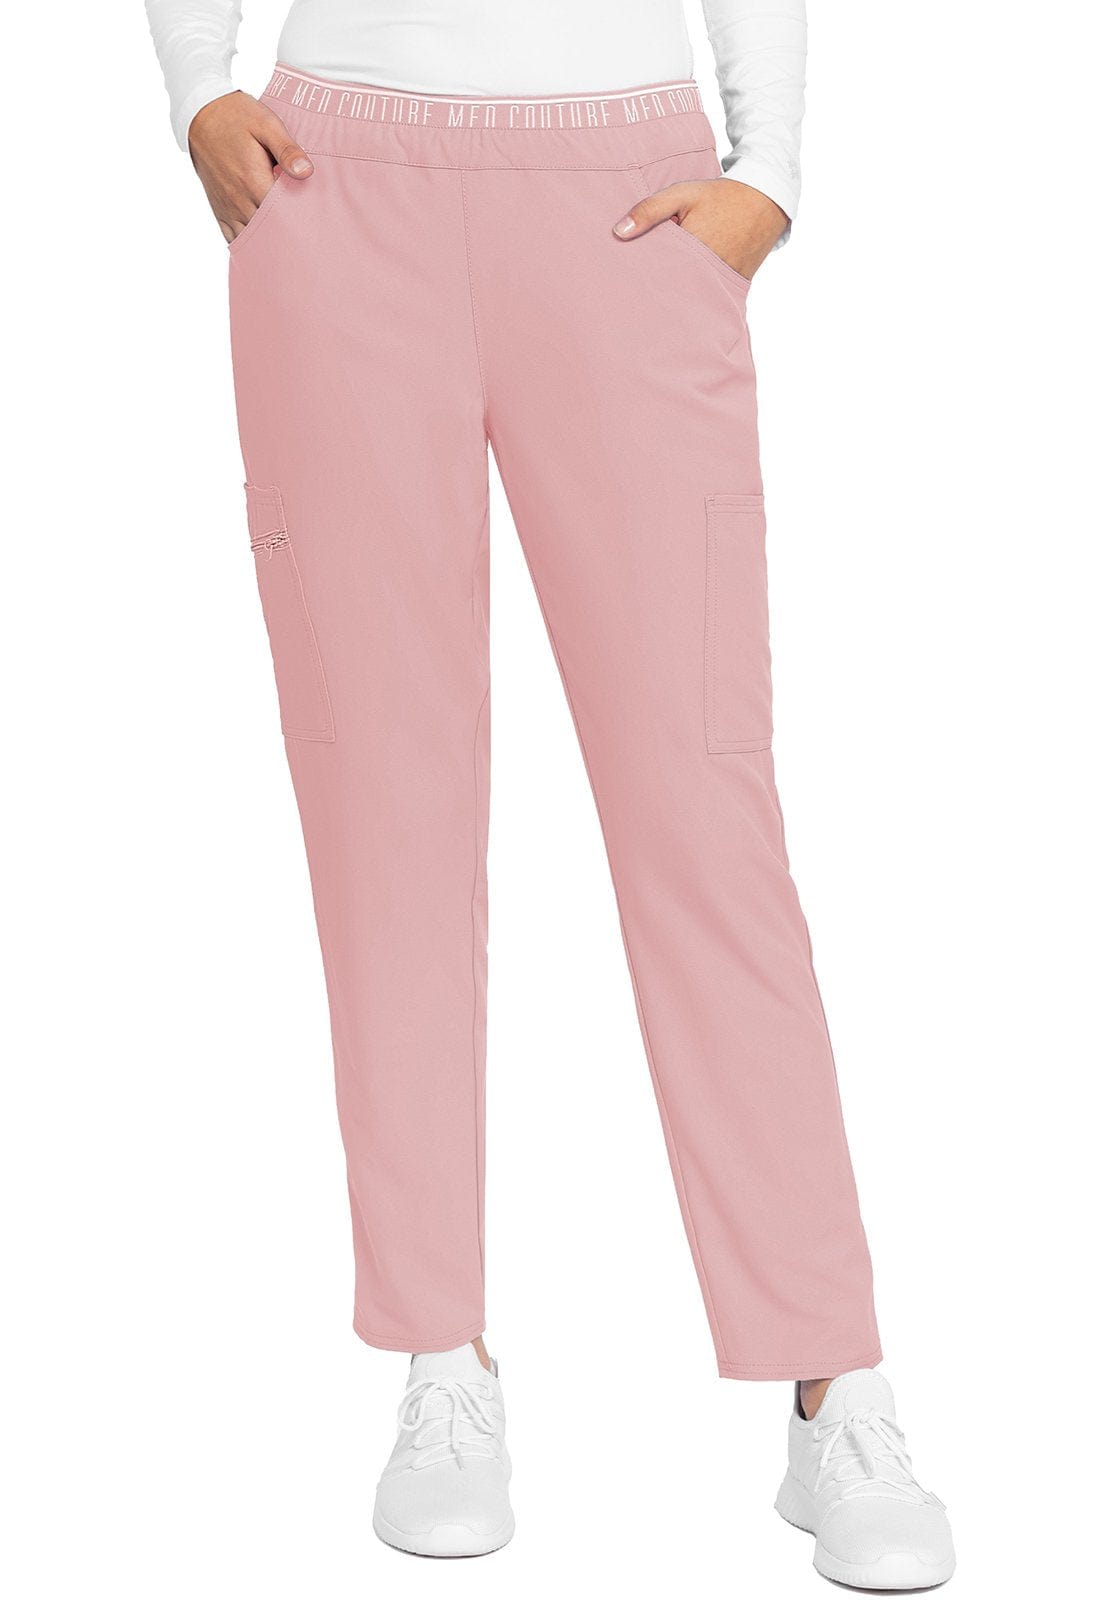 Med Couture MC Insight Perfectly Pink / 2XL MC Insight Petite Mid-rise Tapered Leg Pull-on Scrub Pant MC009P